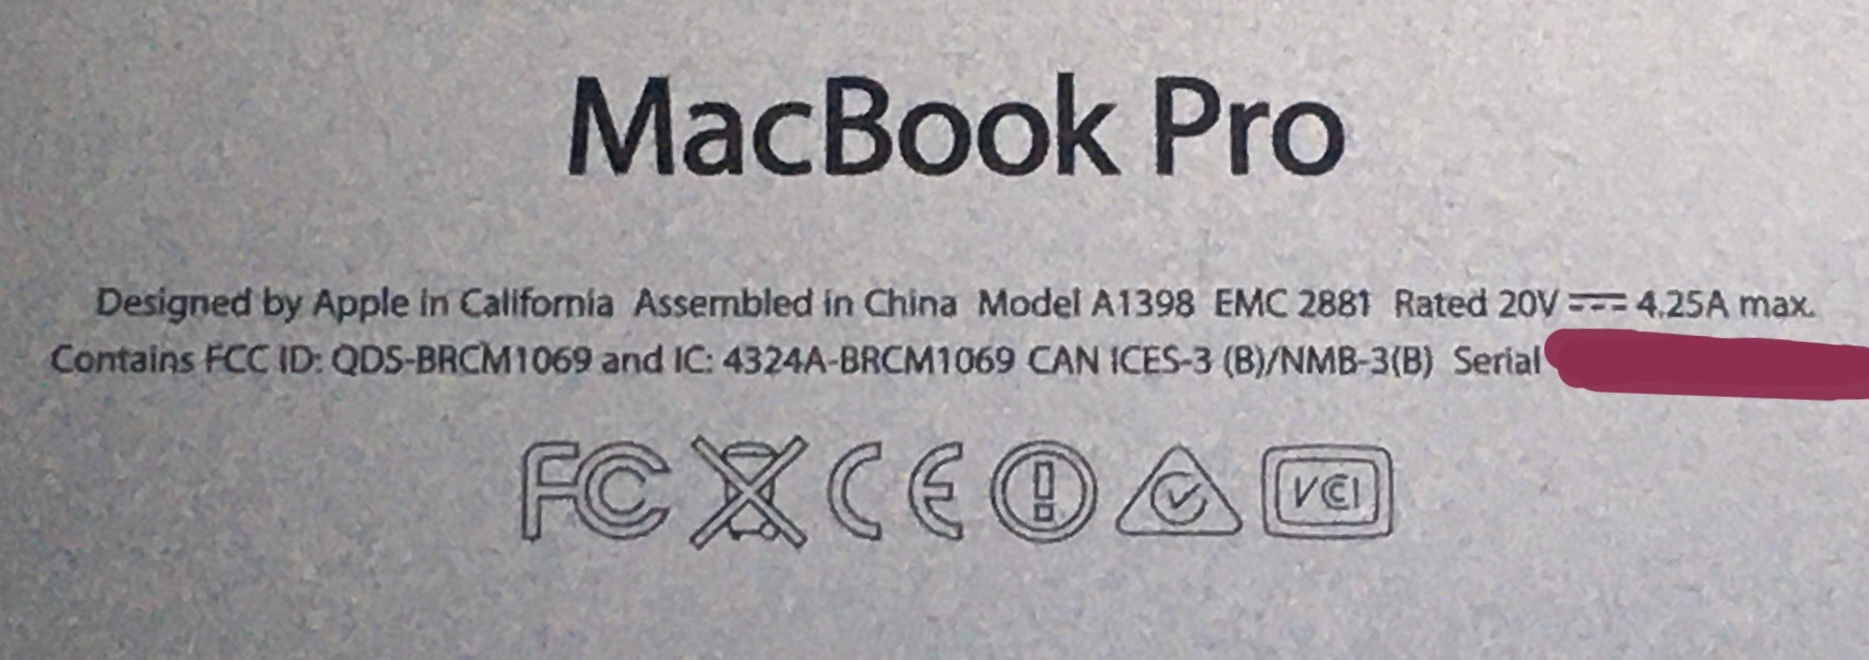 MacBook Pro Retina 15” Purchased in March… - Apple Community